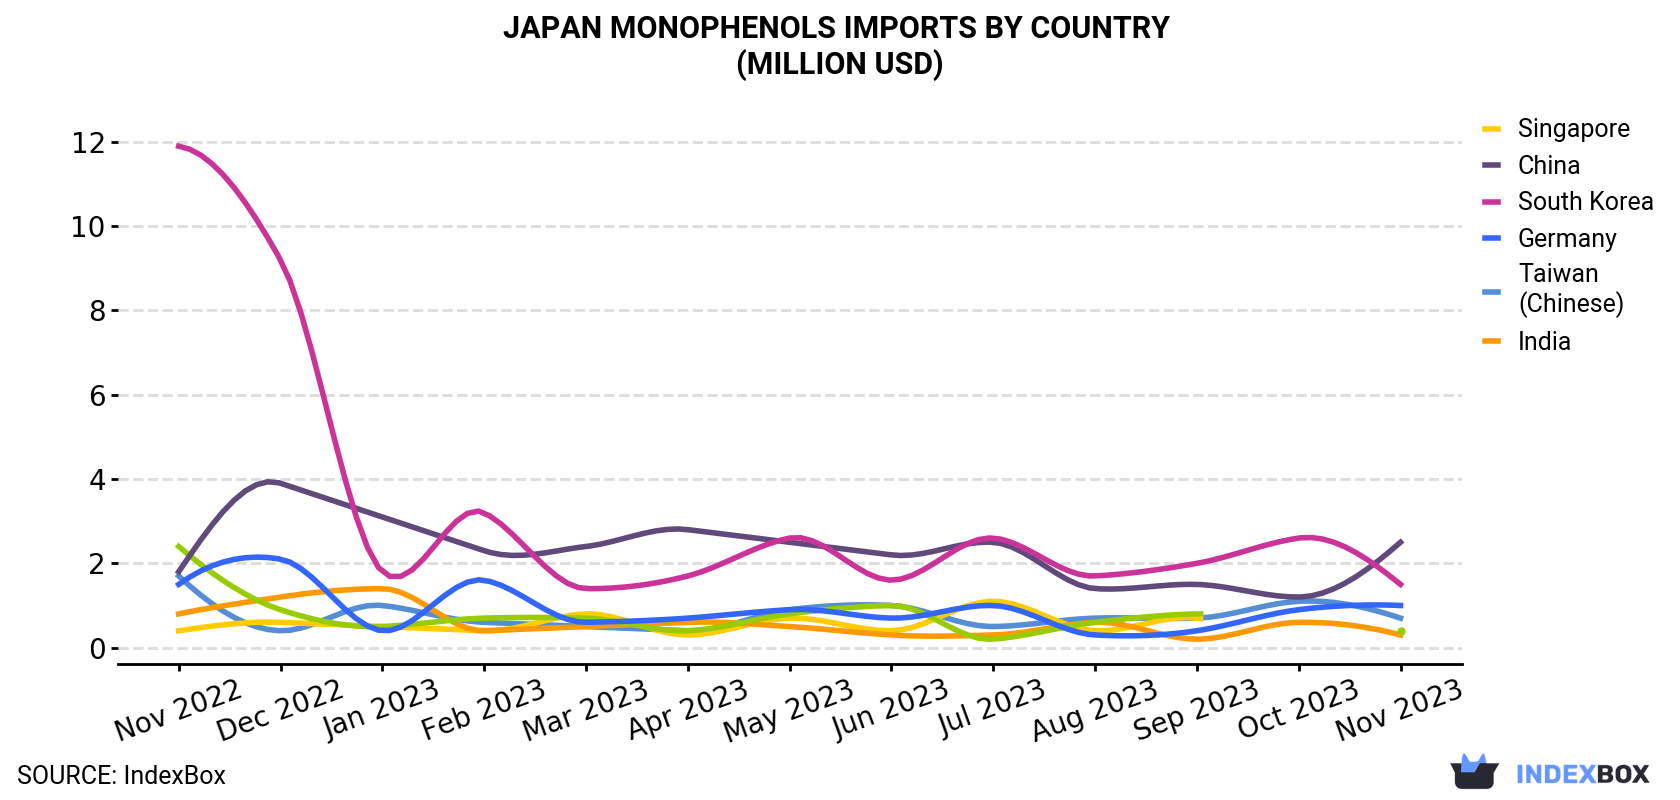 Japan Monophenols Imports By Country (Million USD)